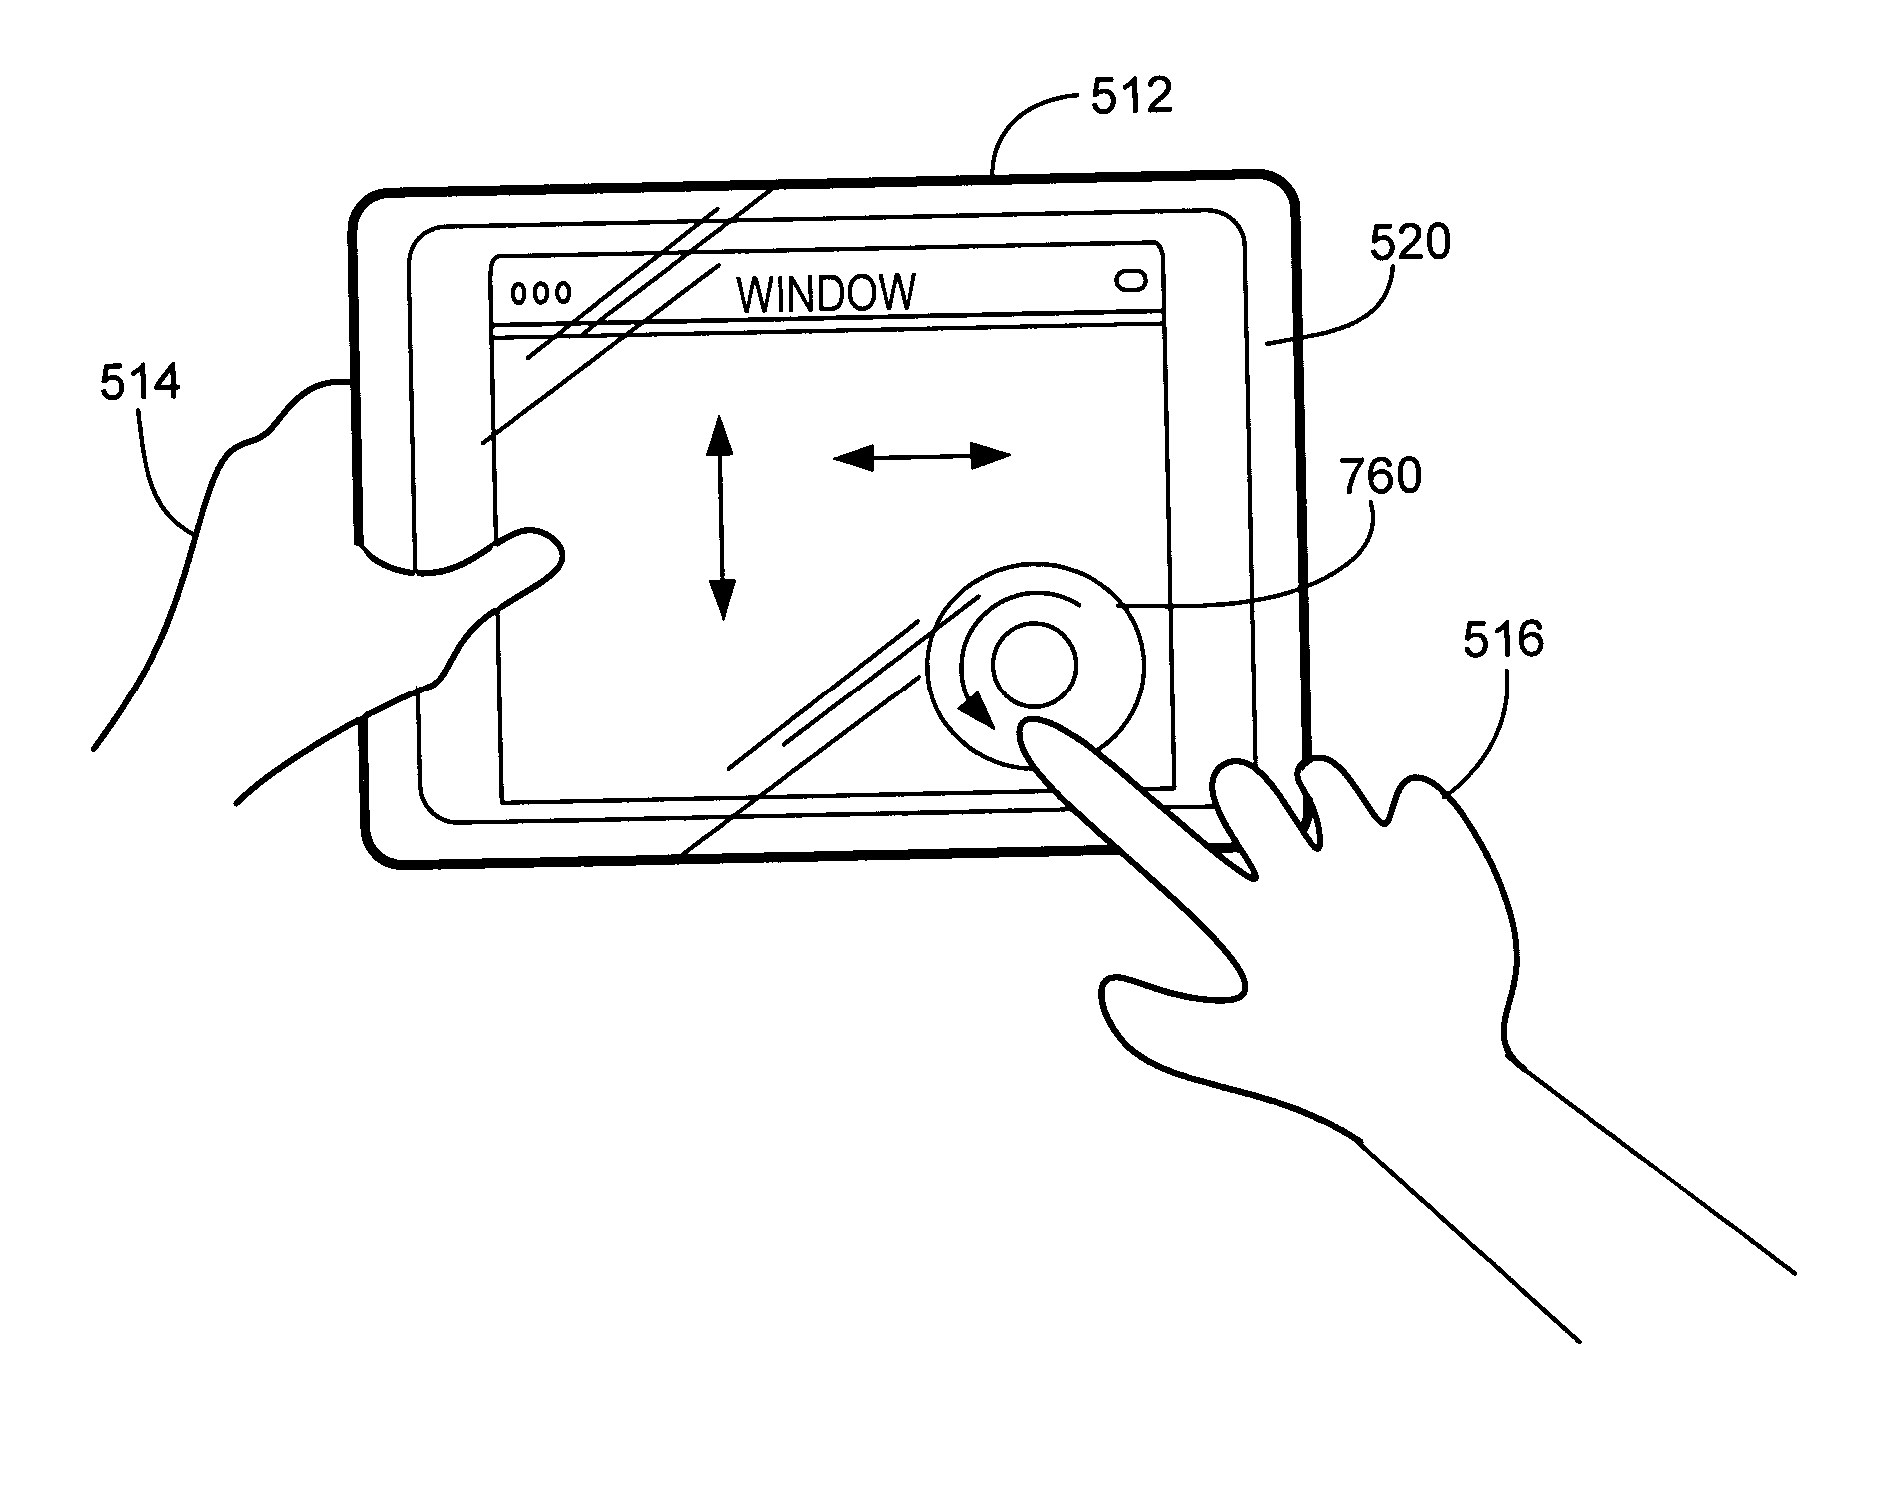 Mode-based graphical user interfaces for touch sensitive input devices